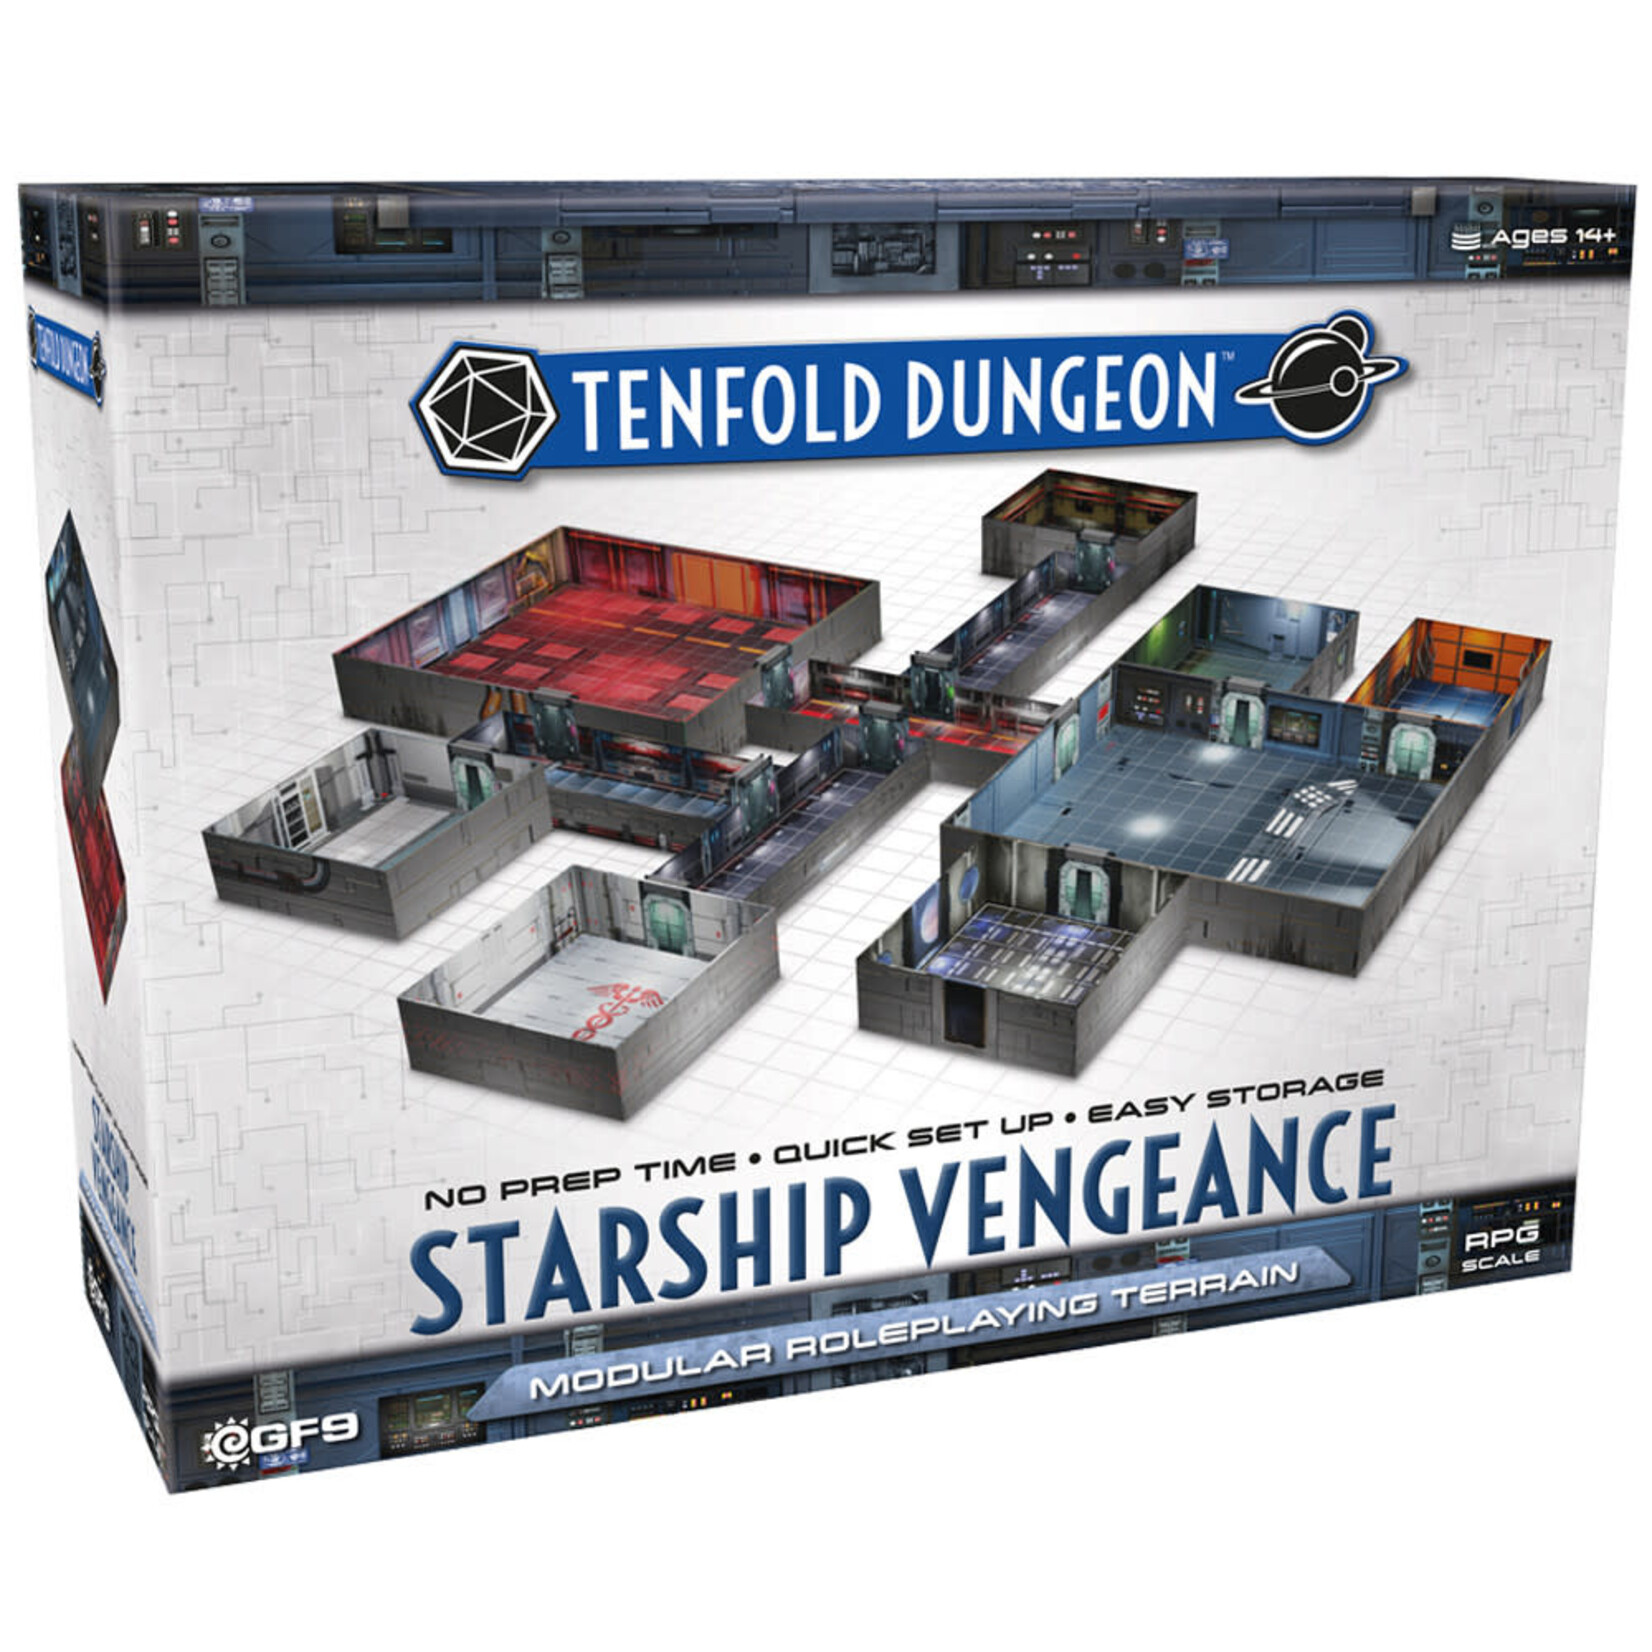 Gale Force 9 Tenfold Dungeon Starship Vengeance